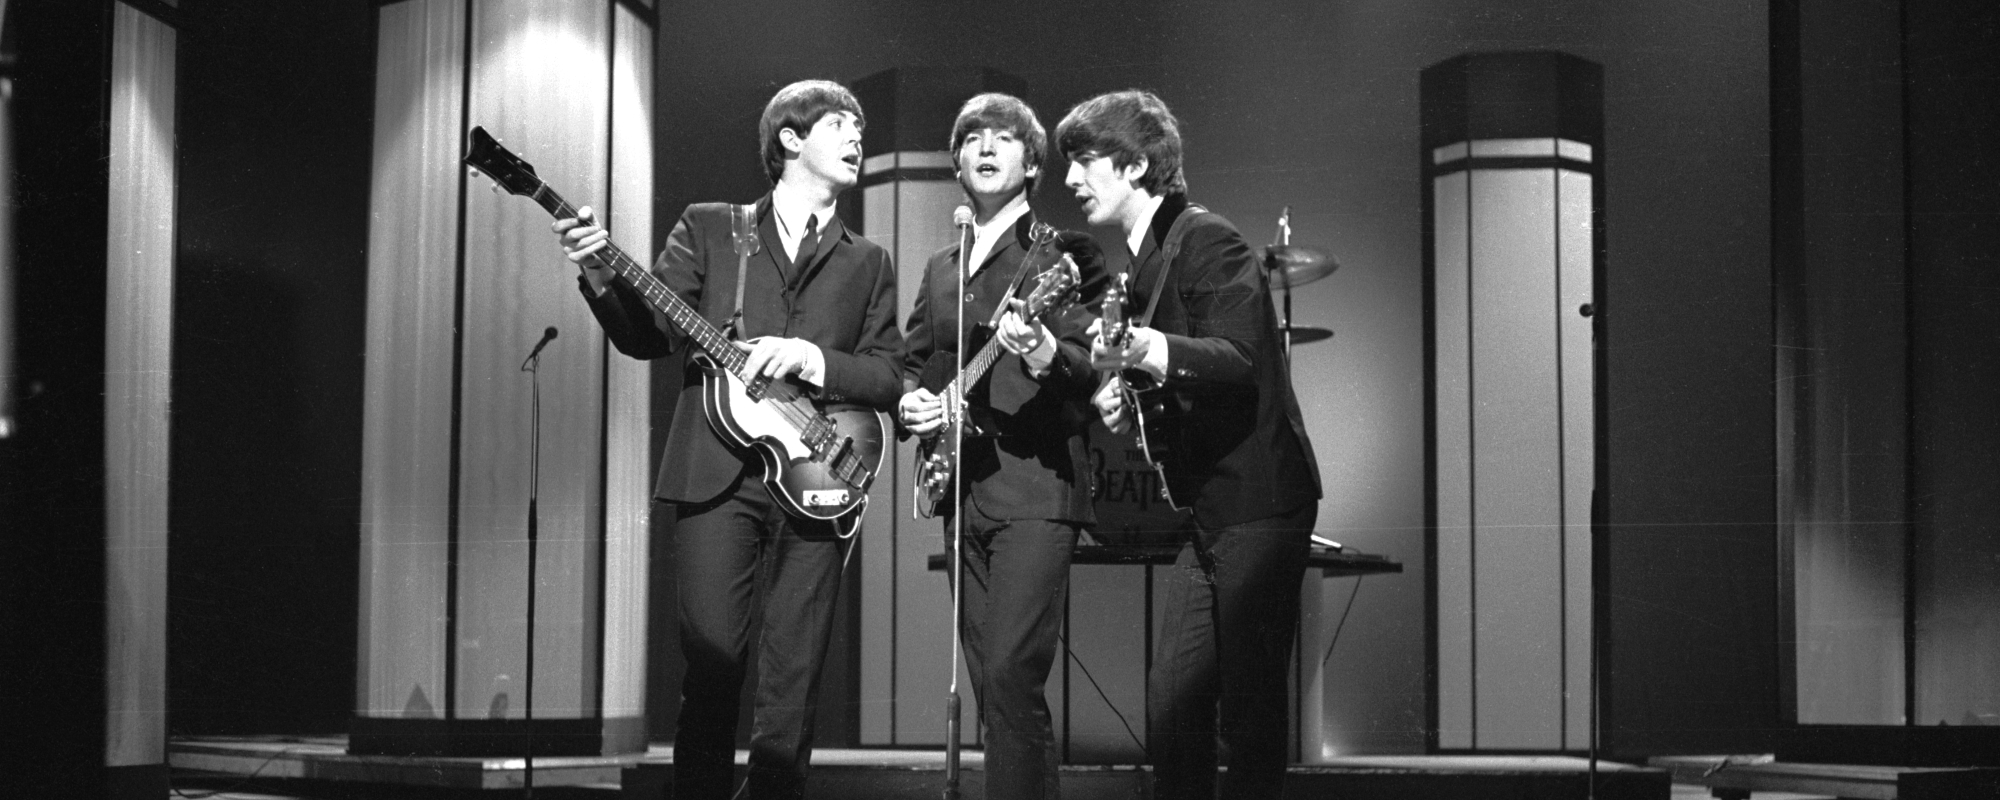 Beatlemania Comes to America: The Story Behind “I Want to Hold Your Hand” by The Beatles